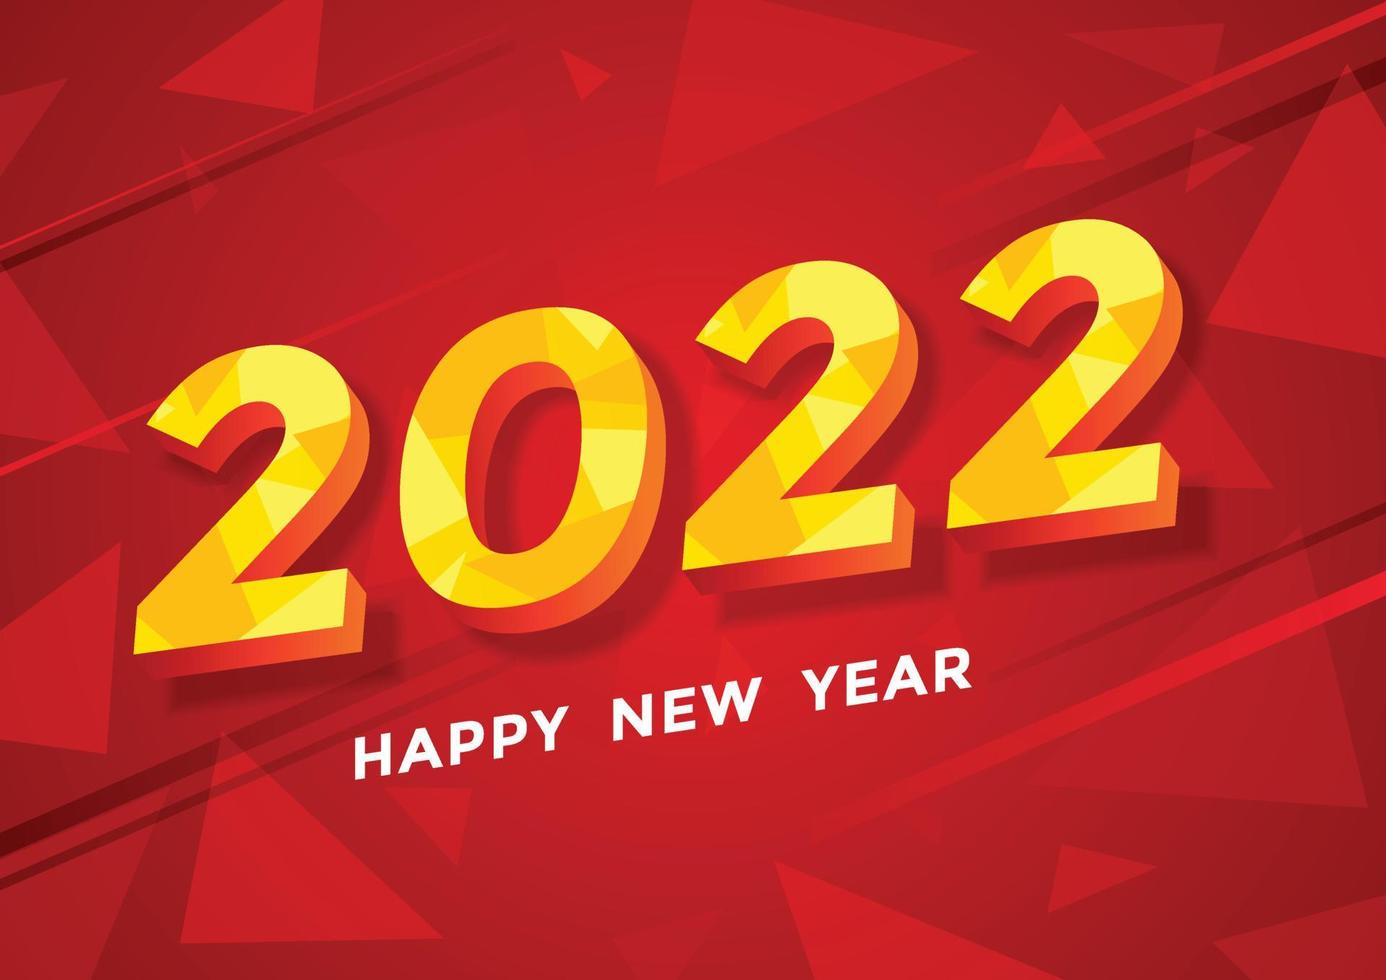 Happy New Year 2022 background template, 3D paper cut style Luxury concept.vector illustration. vector